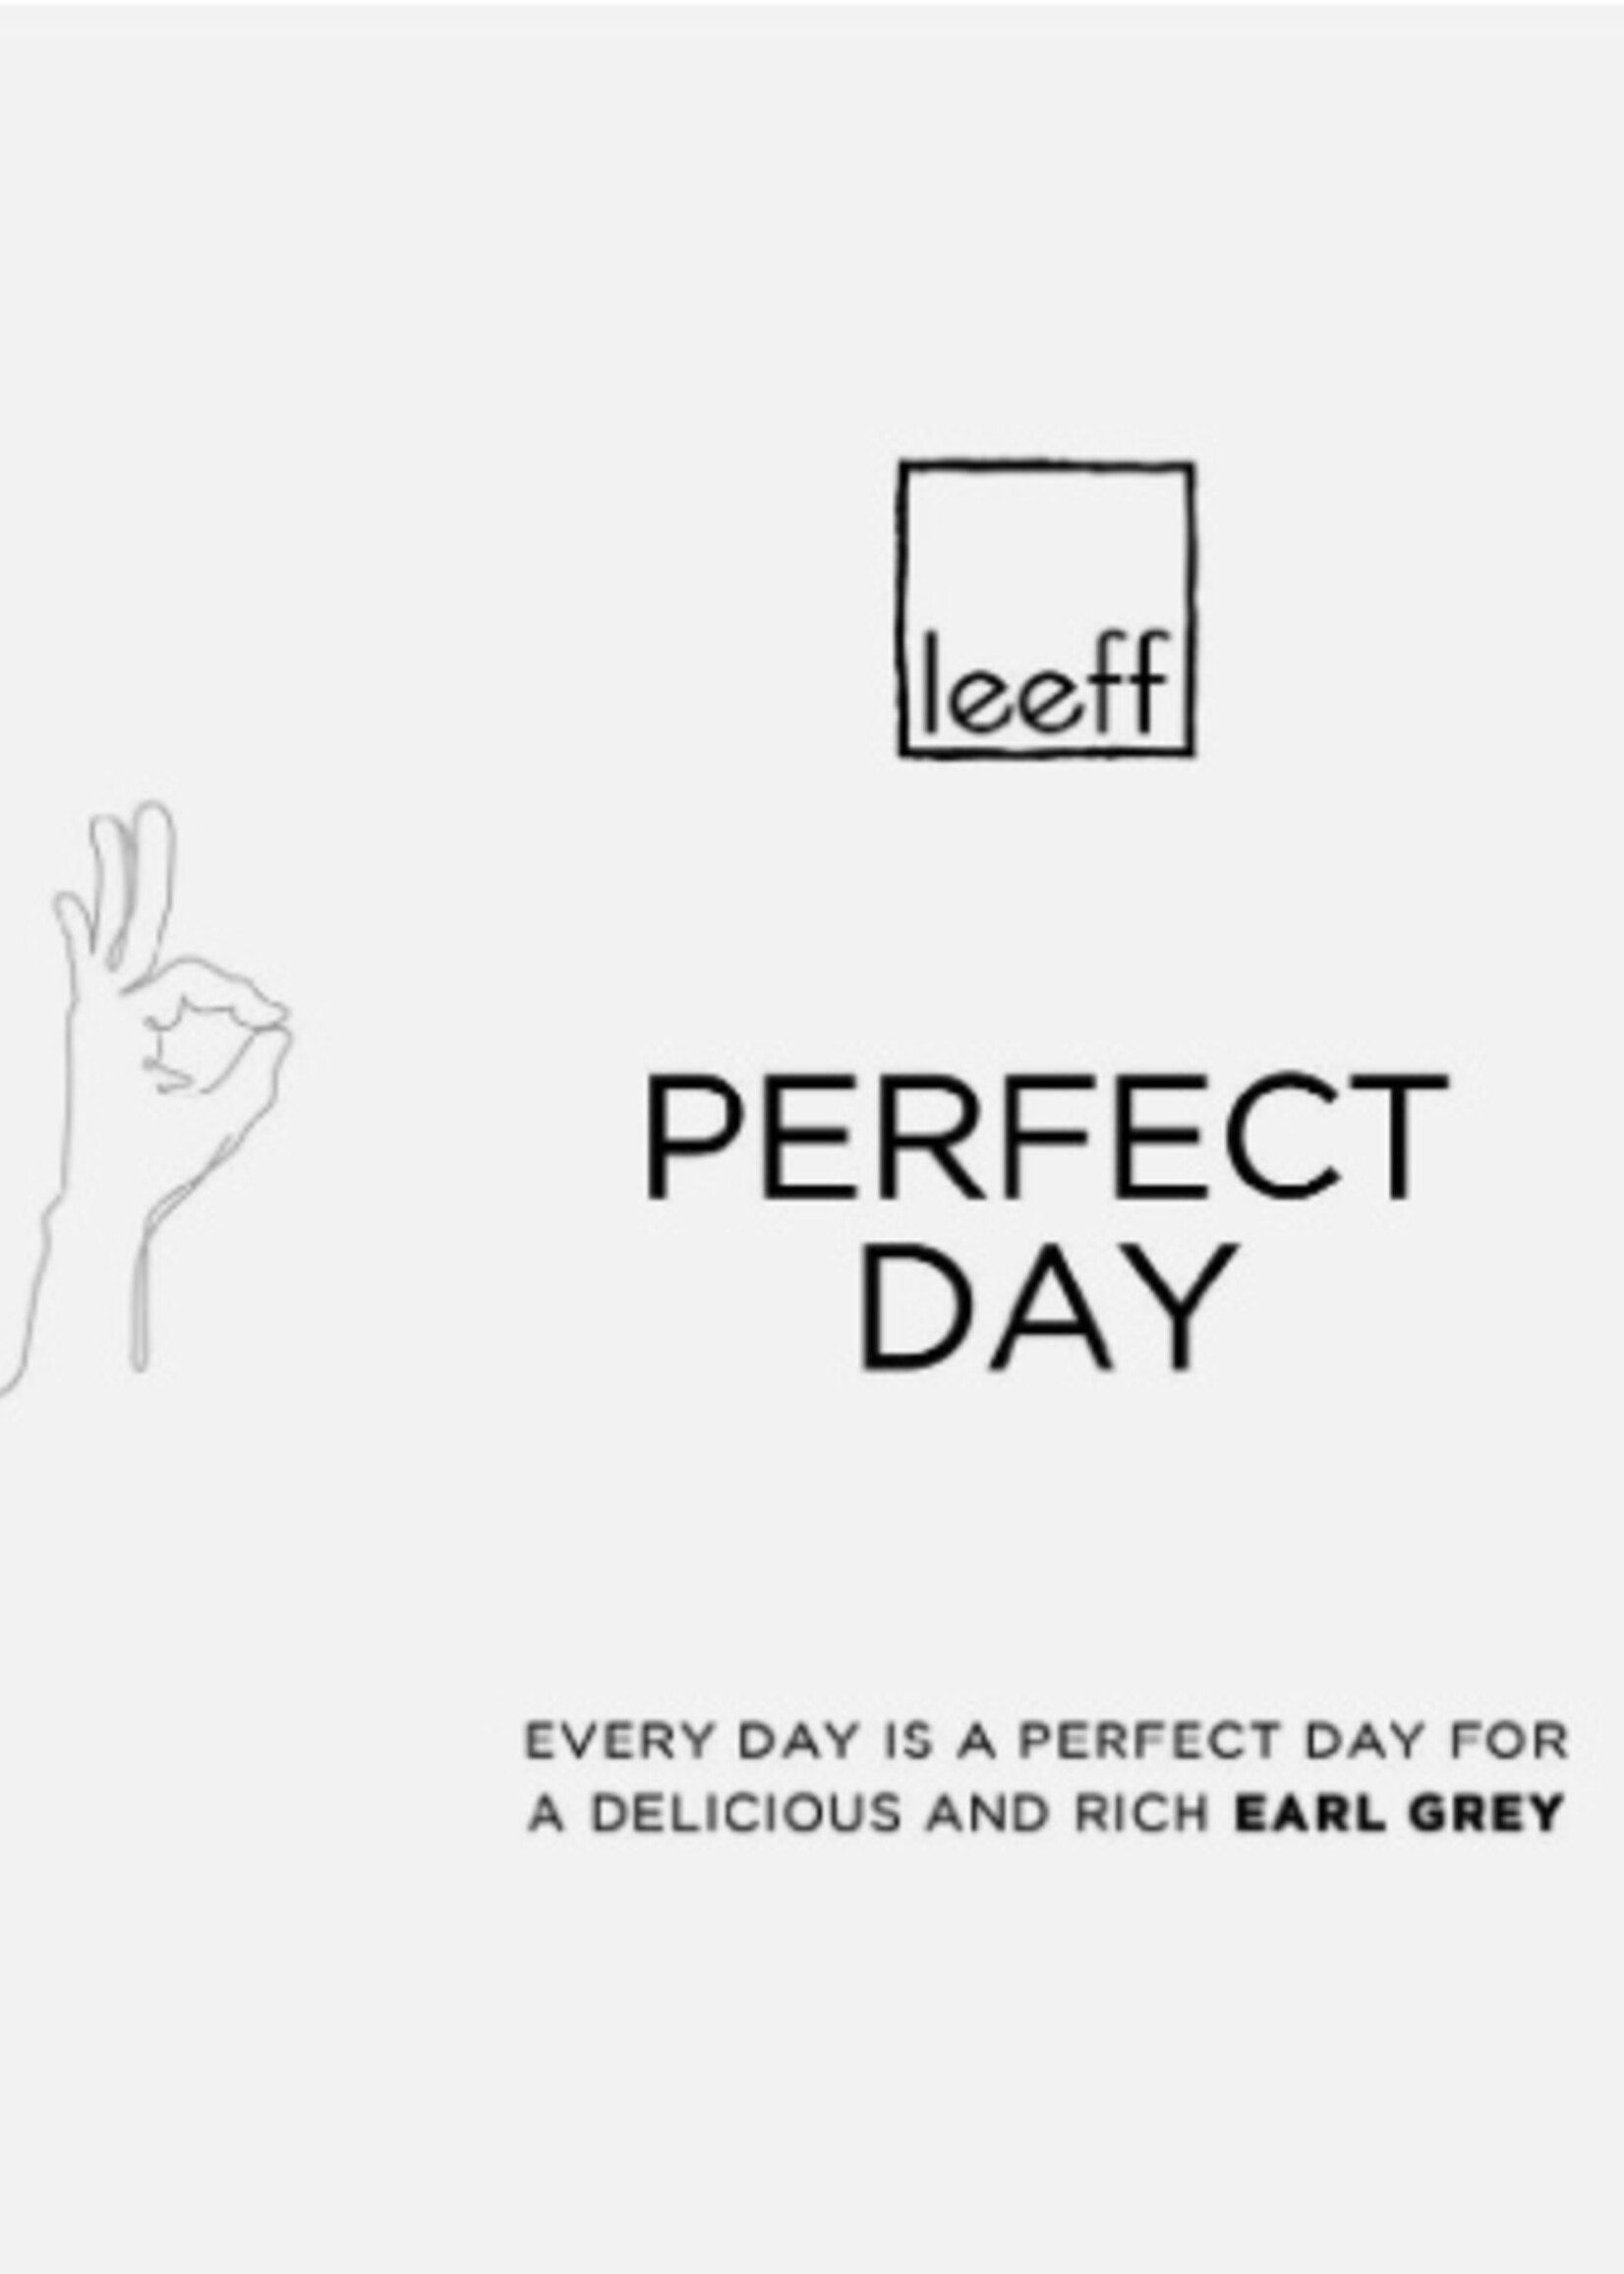 Leeff Thé - perfect day